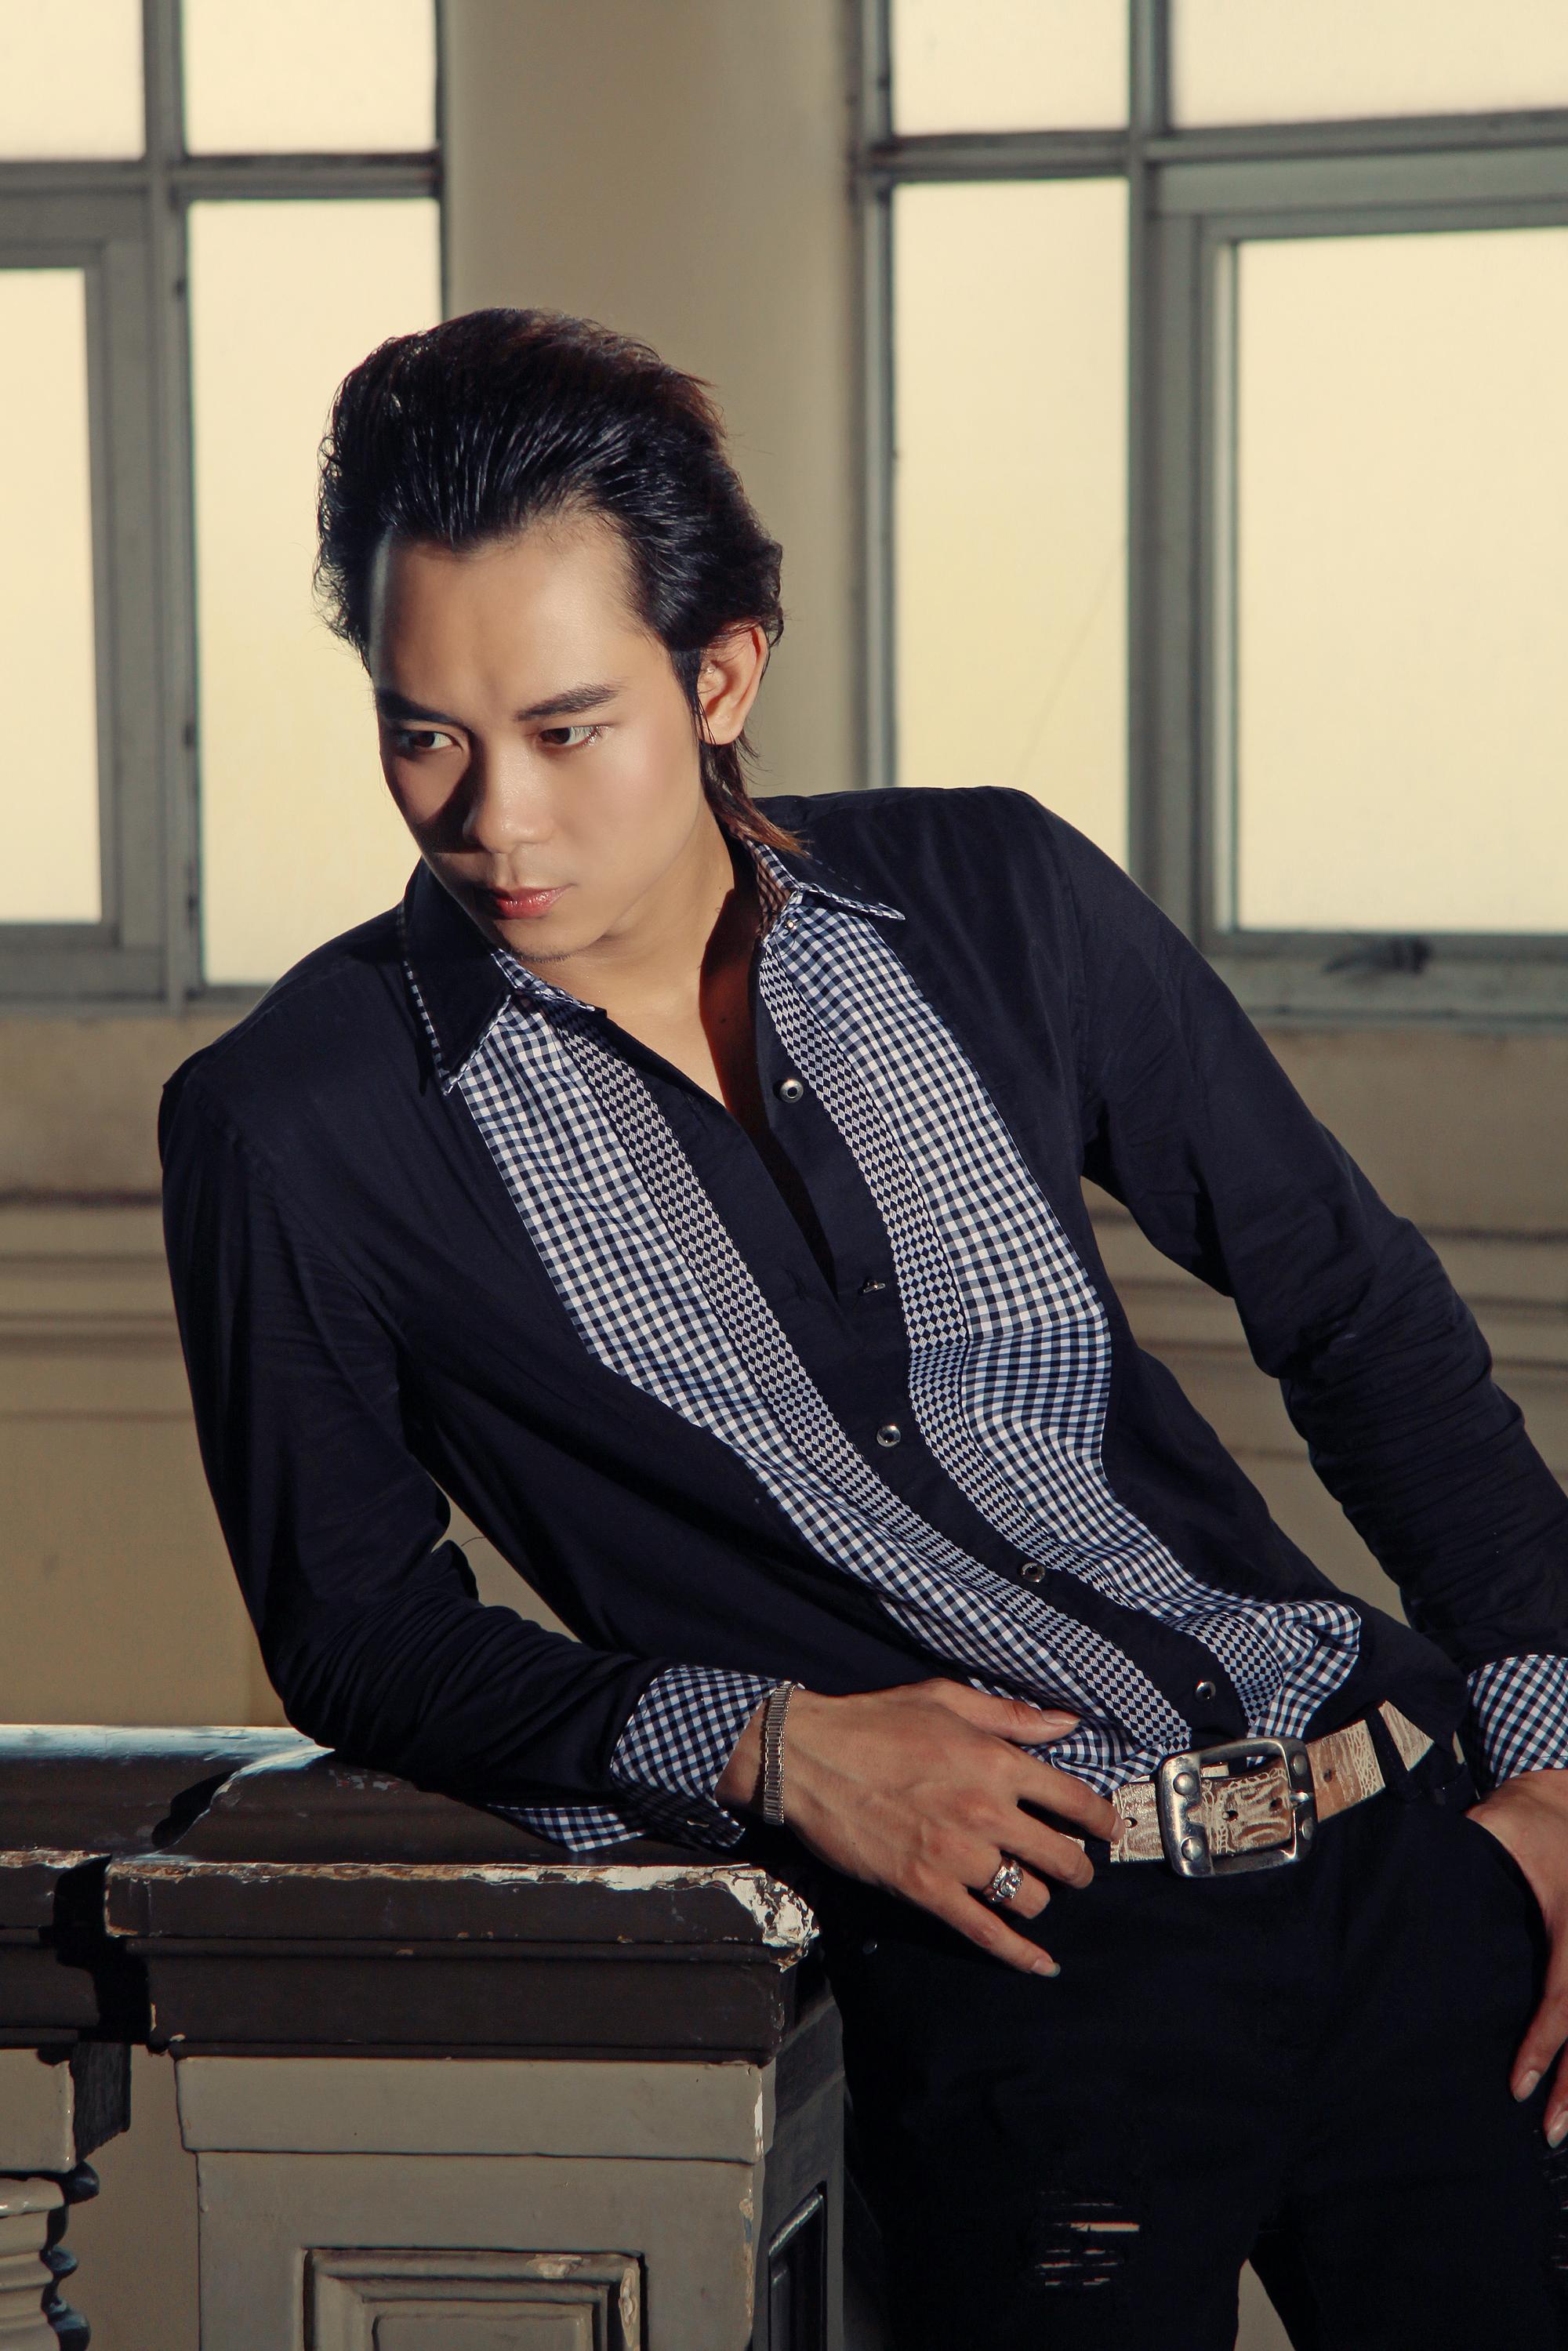  Another image of singer Kaze An